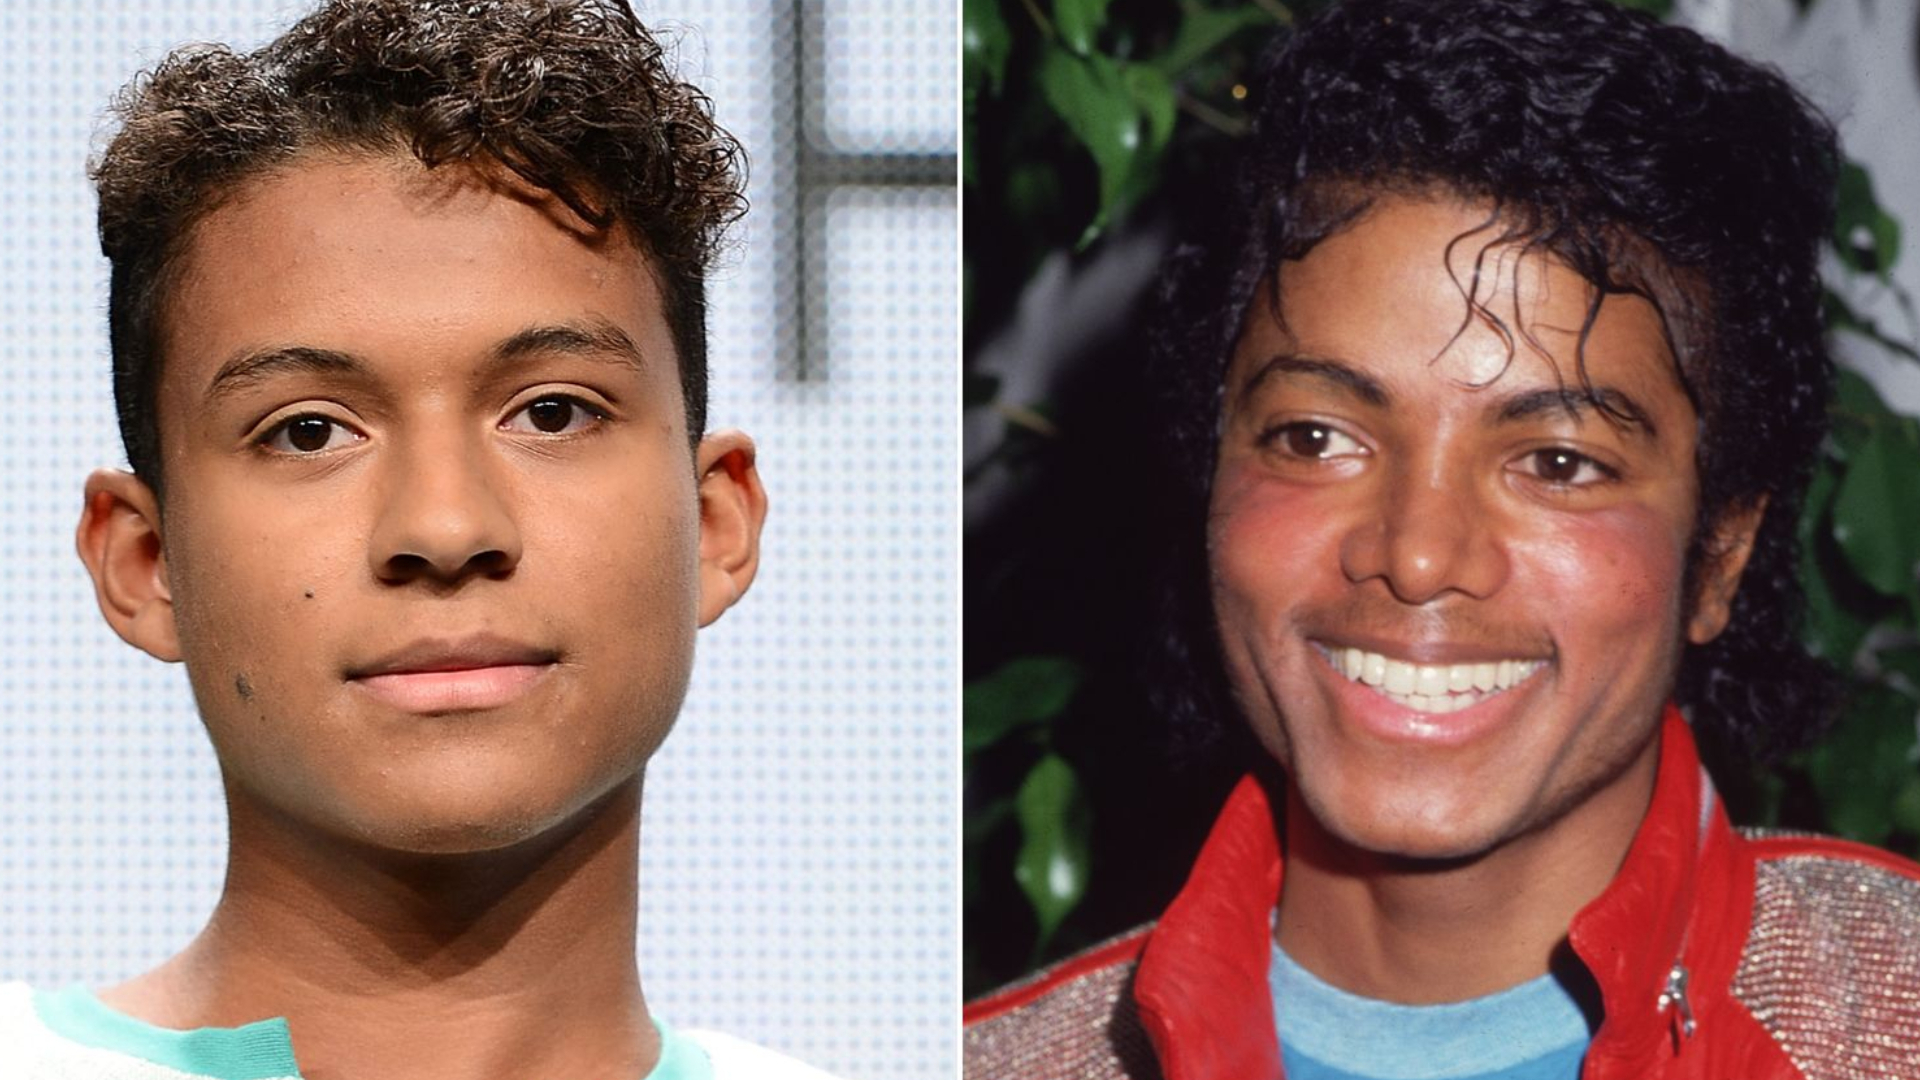 Jaafar Jackson will carry on uncle Michael Jackson’s legacy in upcoming biopic